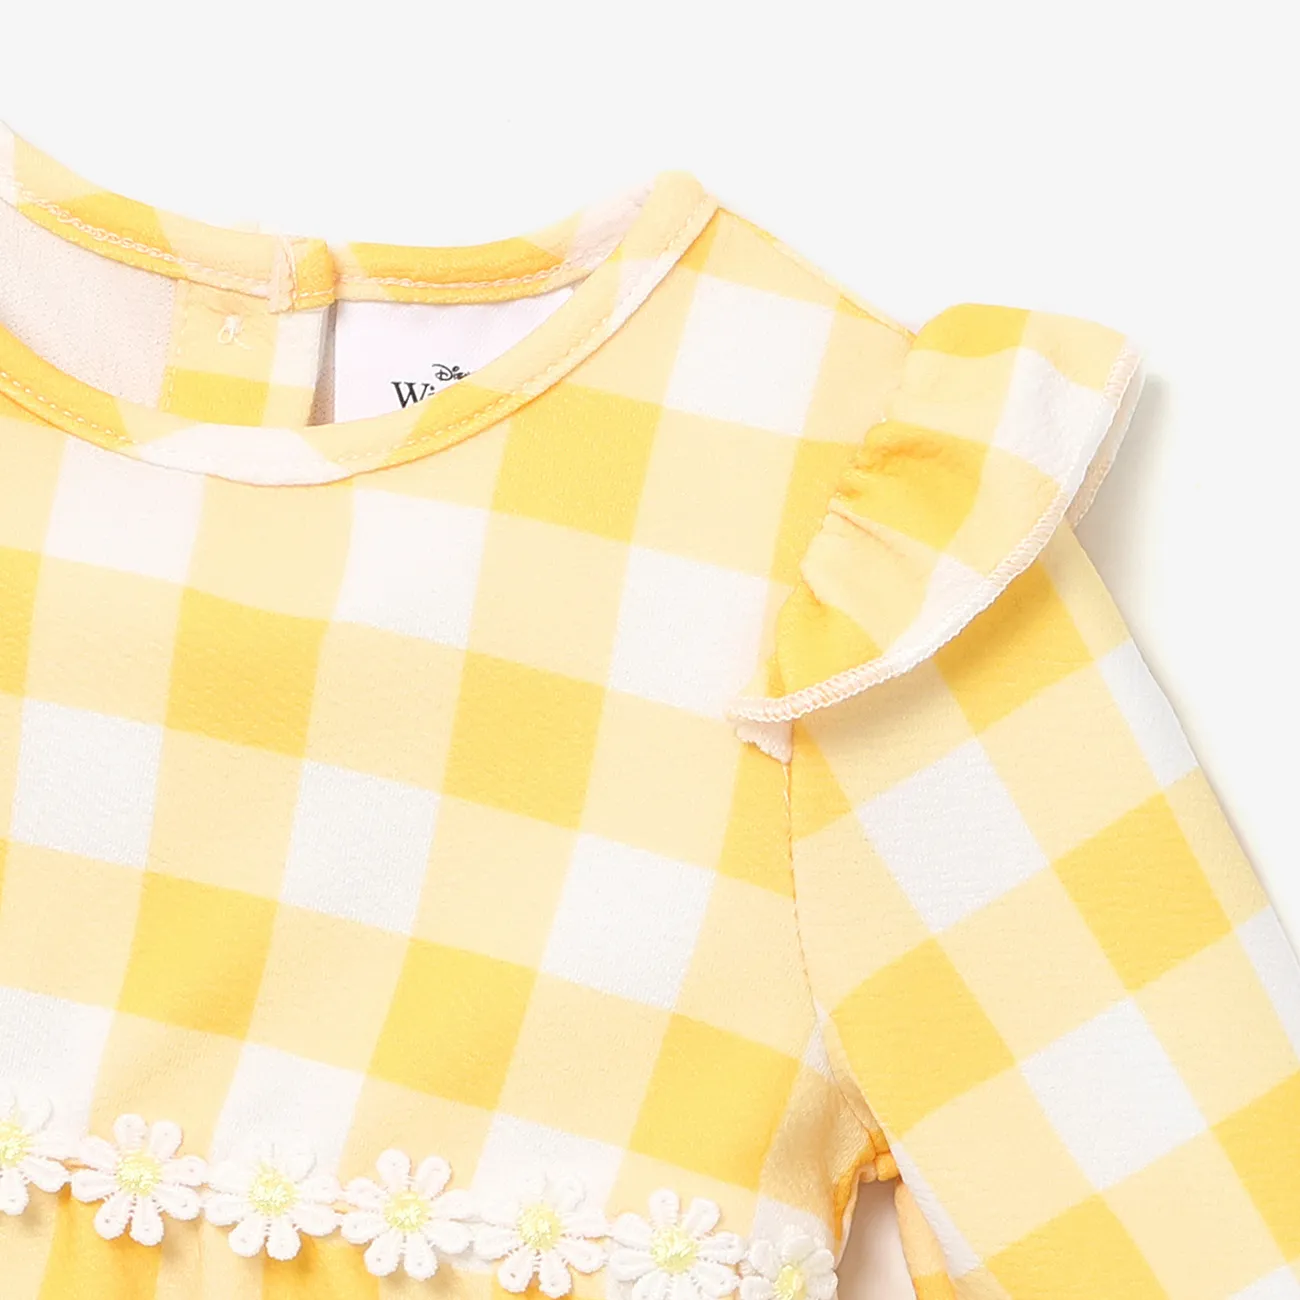 Disney Winnie the Pooh character pattern plaid top paired or with knitted stretch denim jeans Yellow big image 1